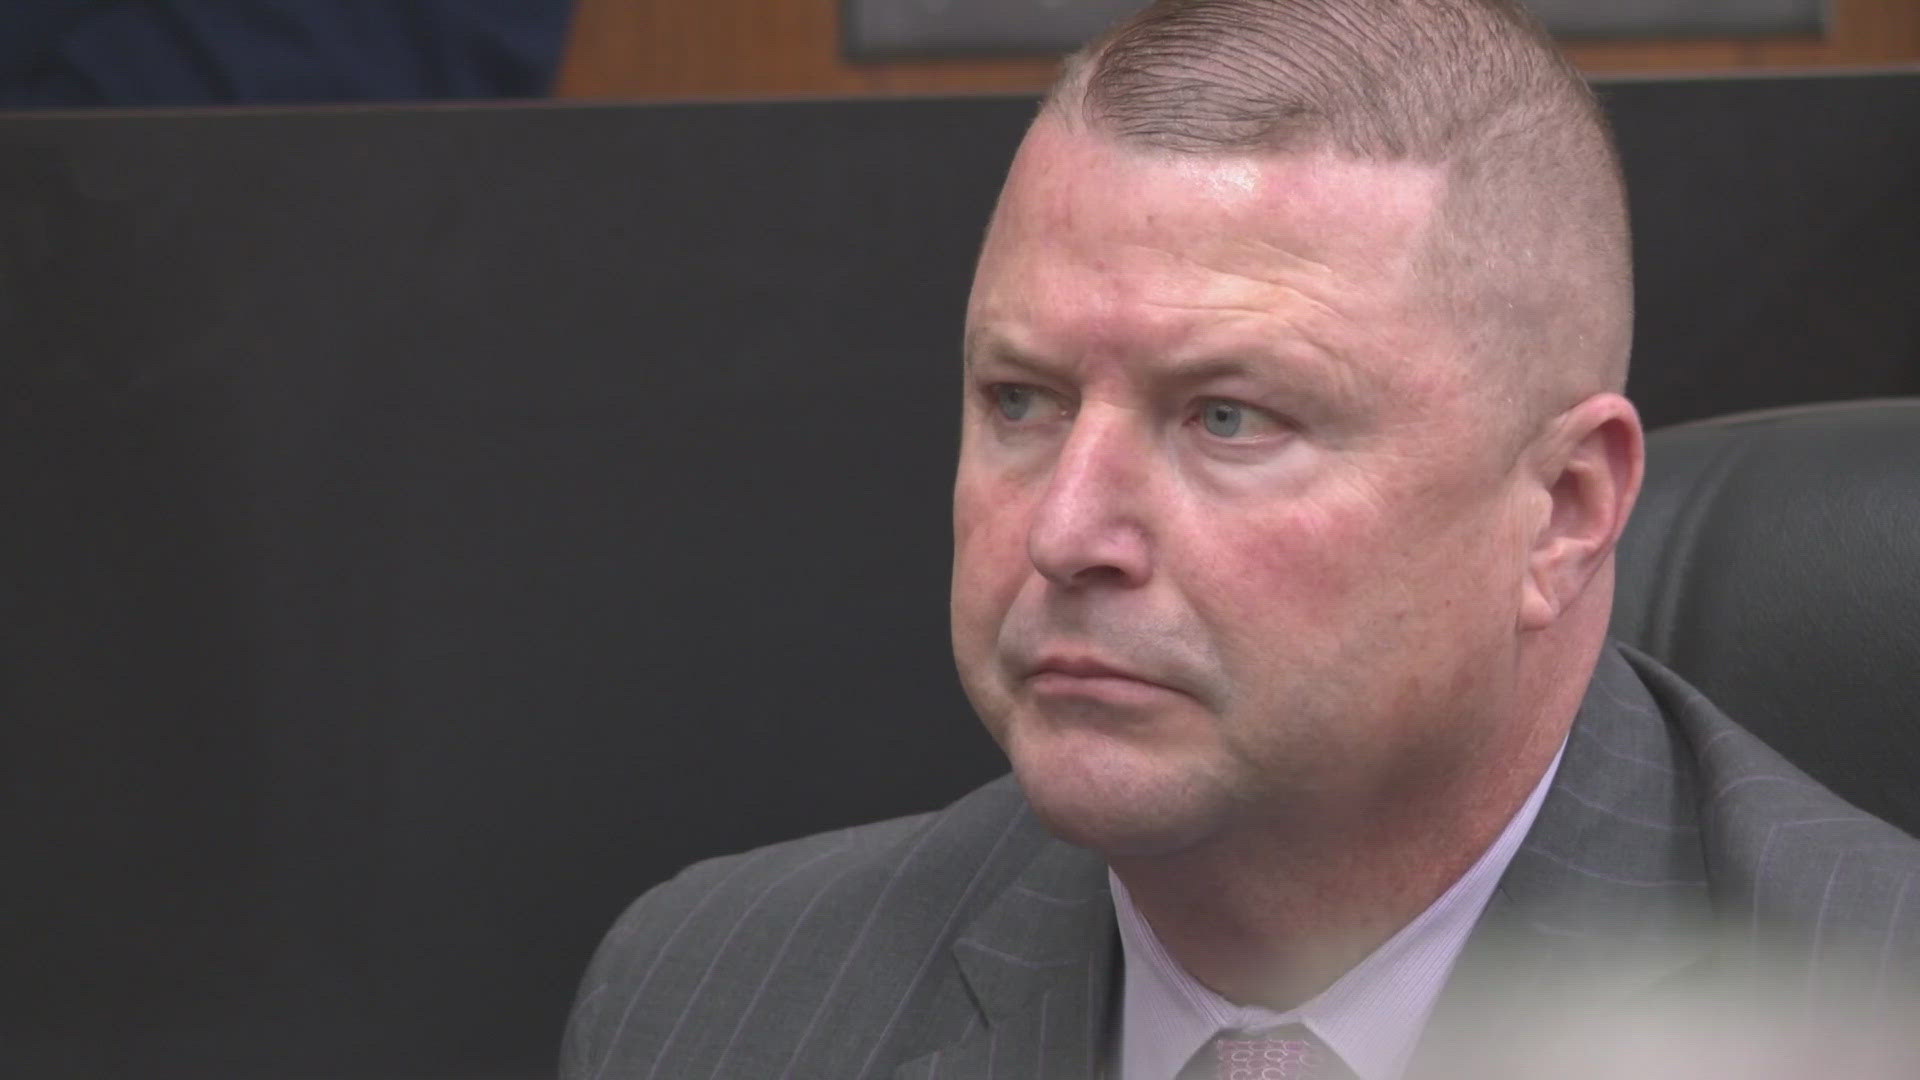 The Indiana Board of Accounts has requested former southern Indiana sheriff Jamey Noel repay nearly $1 million in misused jail commissary funds.